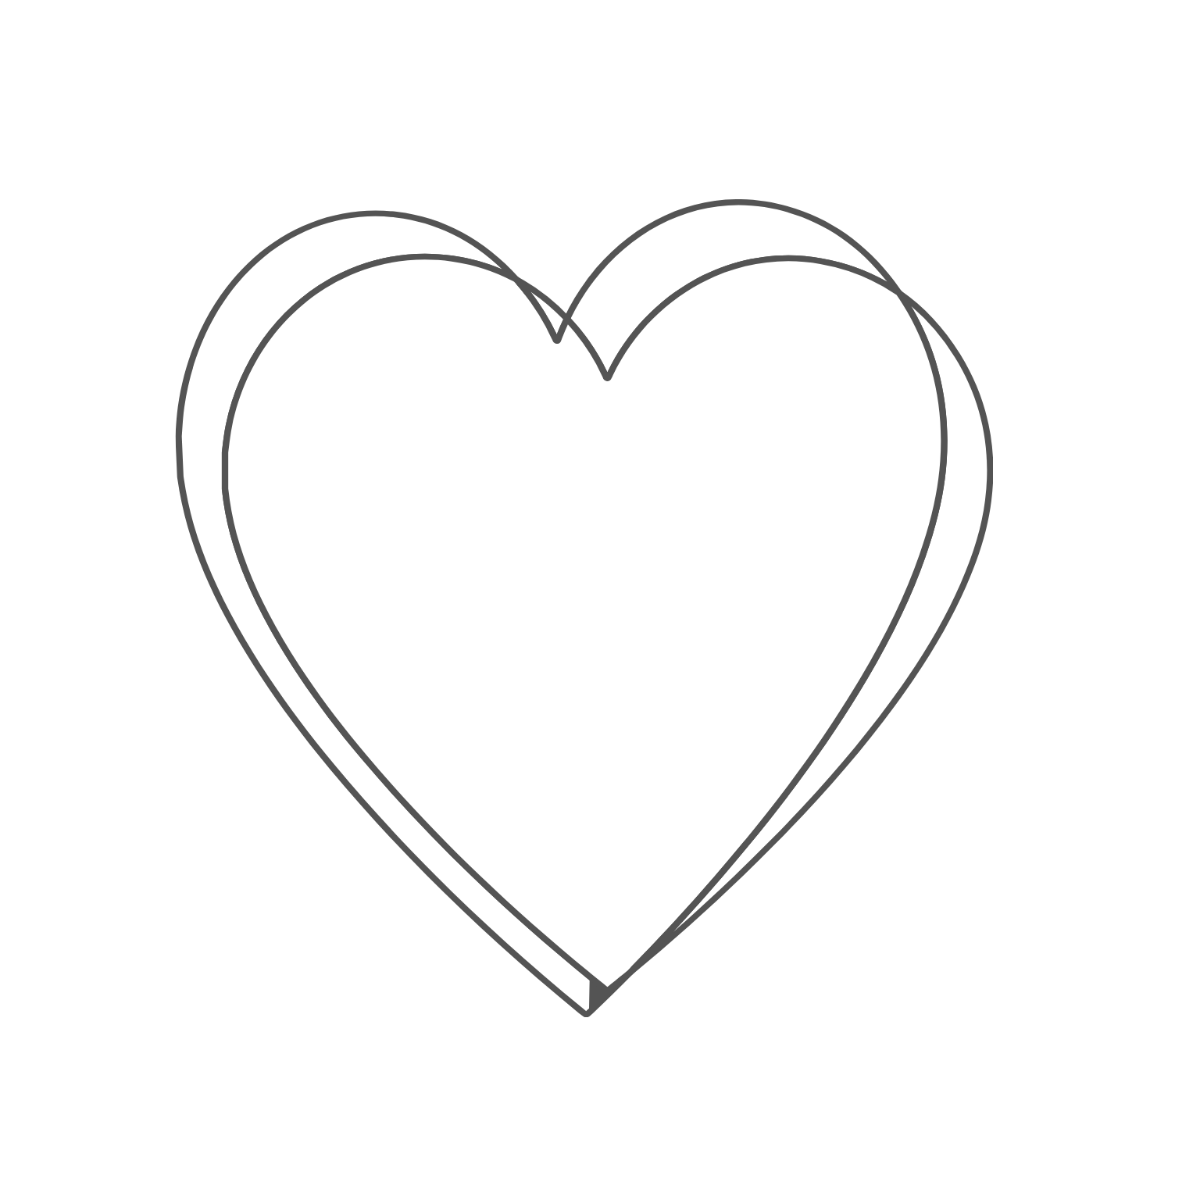 Heart Outline Sketch Clipart